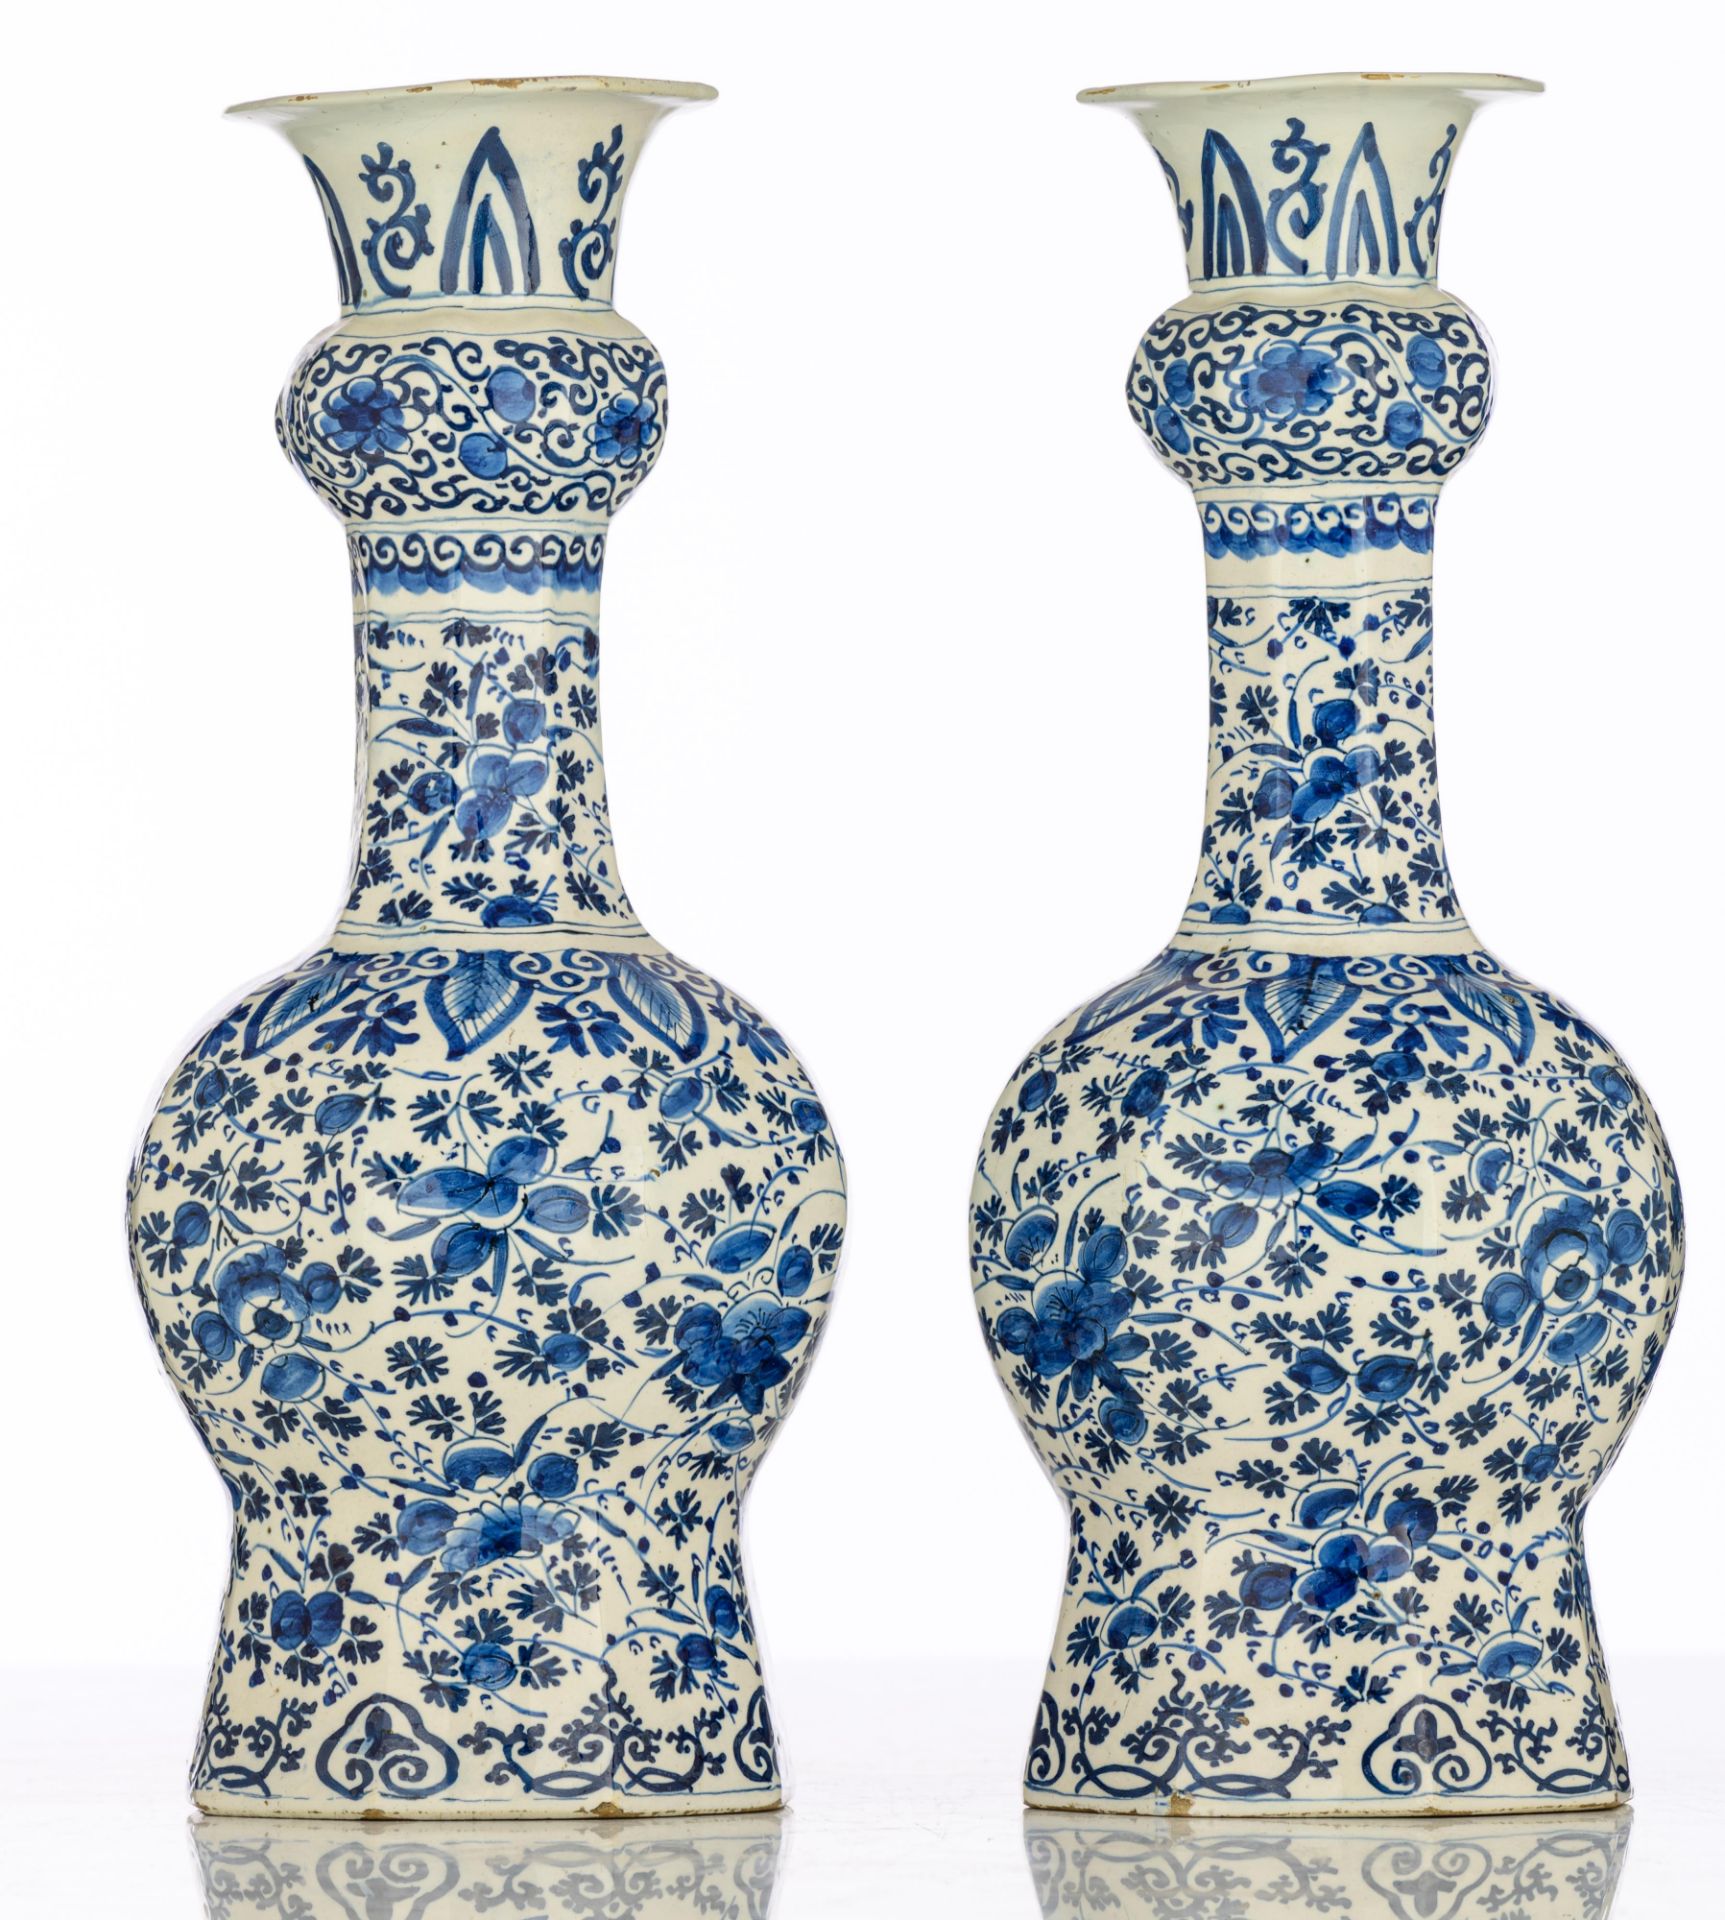 A pair of blue and white floral decorated Dutch Delftware garlic bottle vases, 18thC, H 37 cm. Added - Bild 5 aus 17